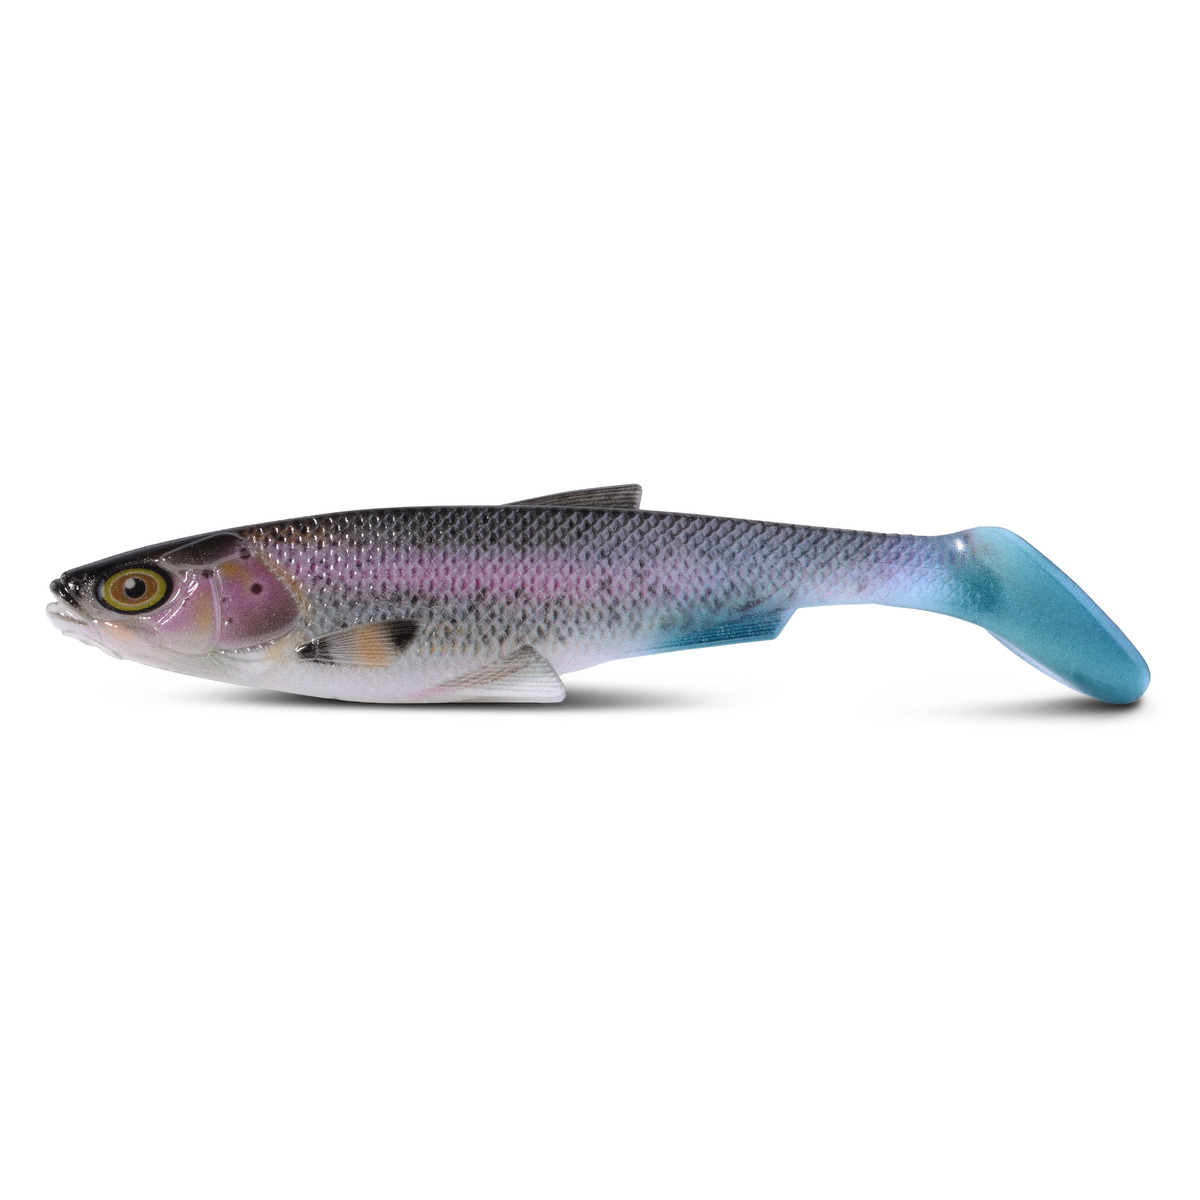 Iron Claw Belly Boy Ng Nature 21 Cm - Trota arcobaleno